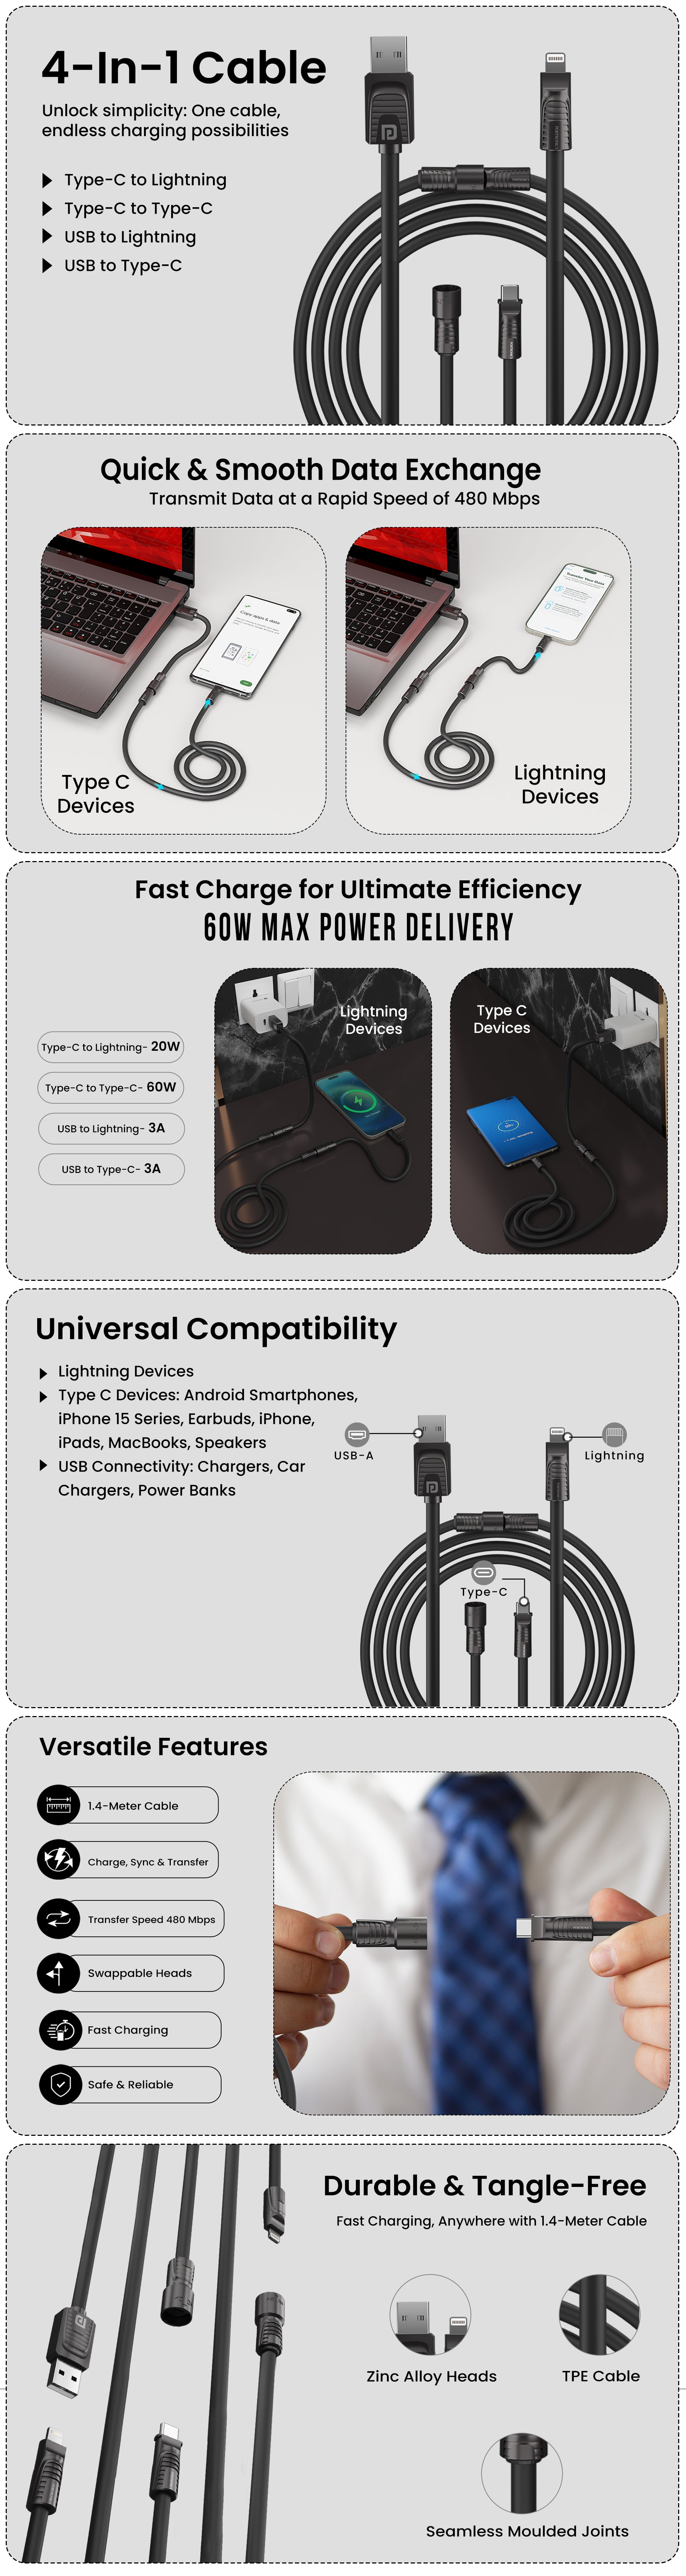 Portronics Konnect Tetra 4 in 1 type c charging cable| type c to type c cable| usb cable to type c| data cable| charging cable